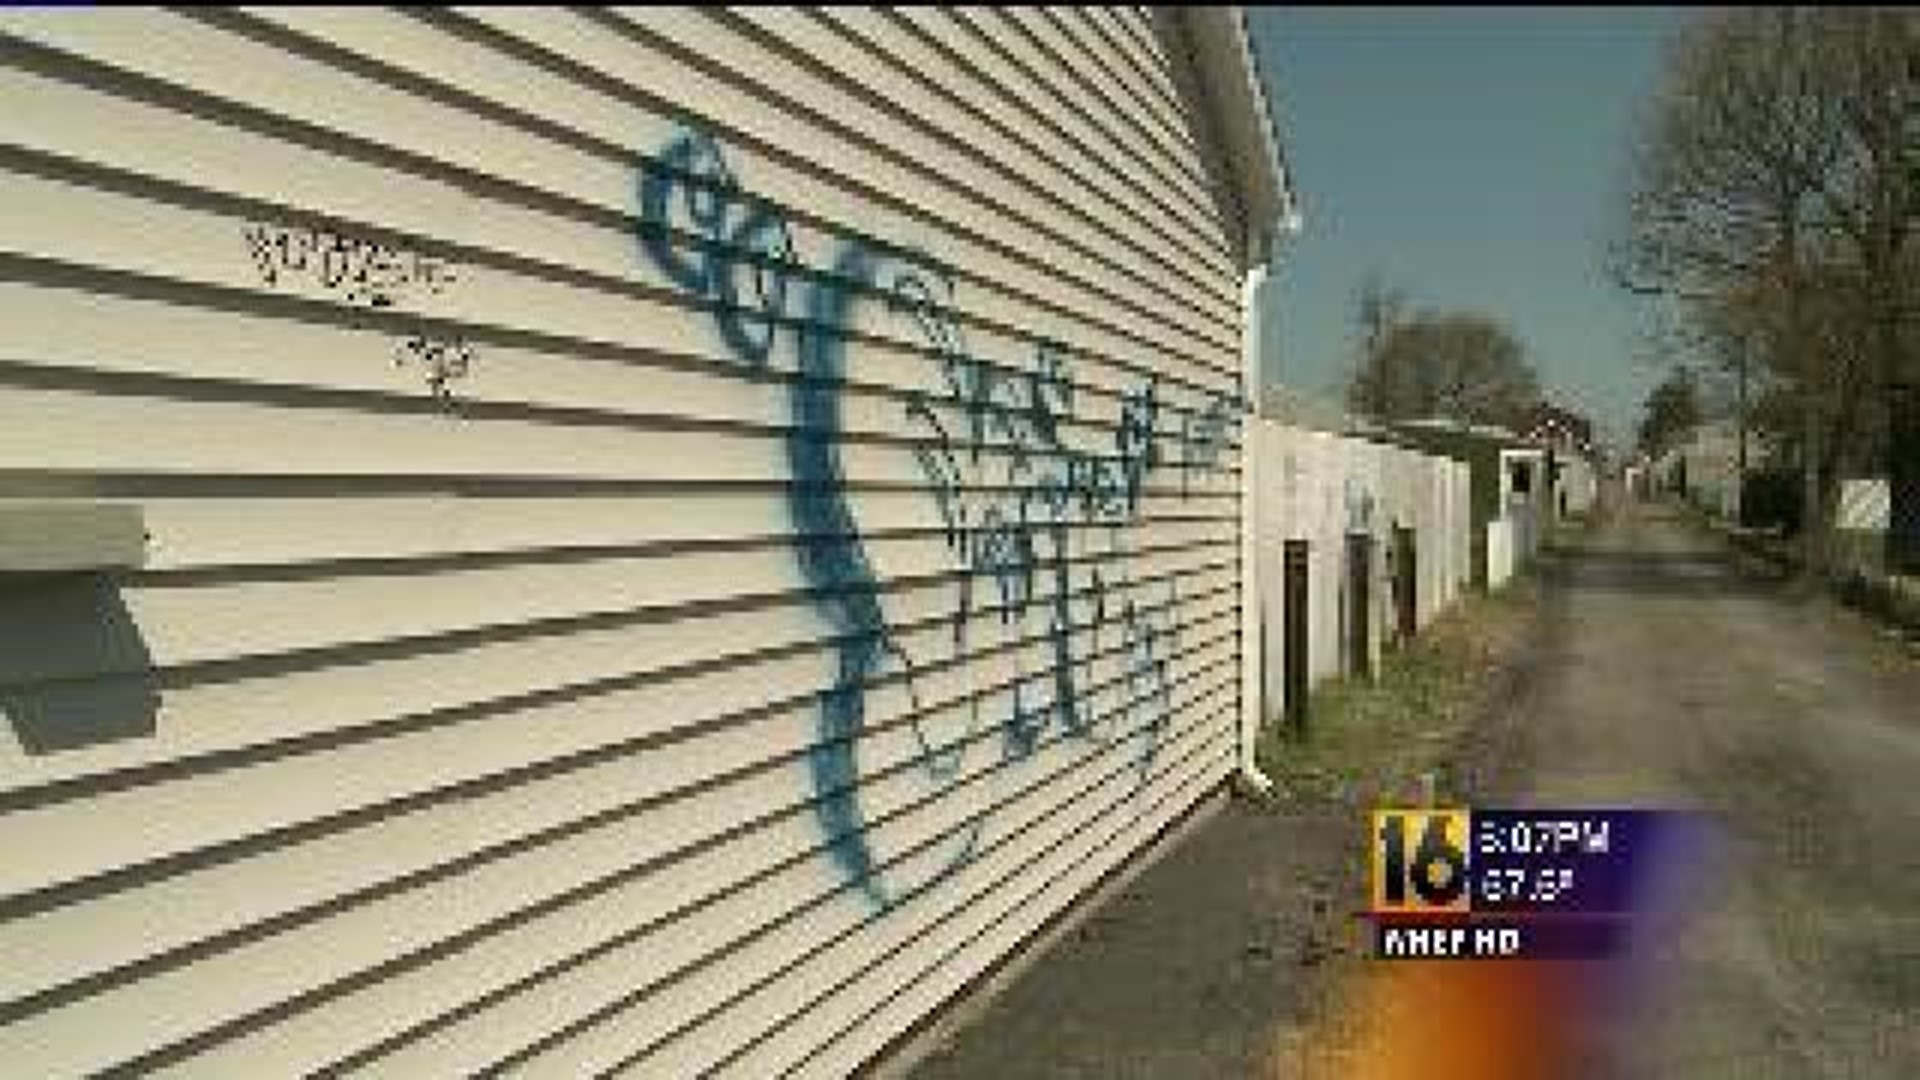 Garages Vandalized in Luzerne County